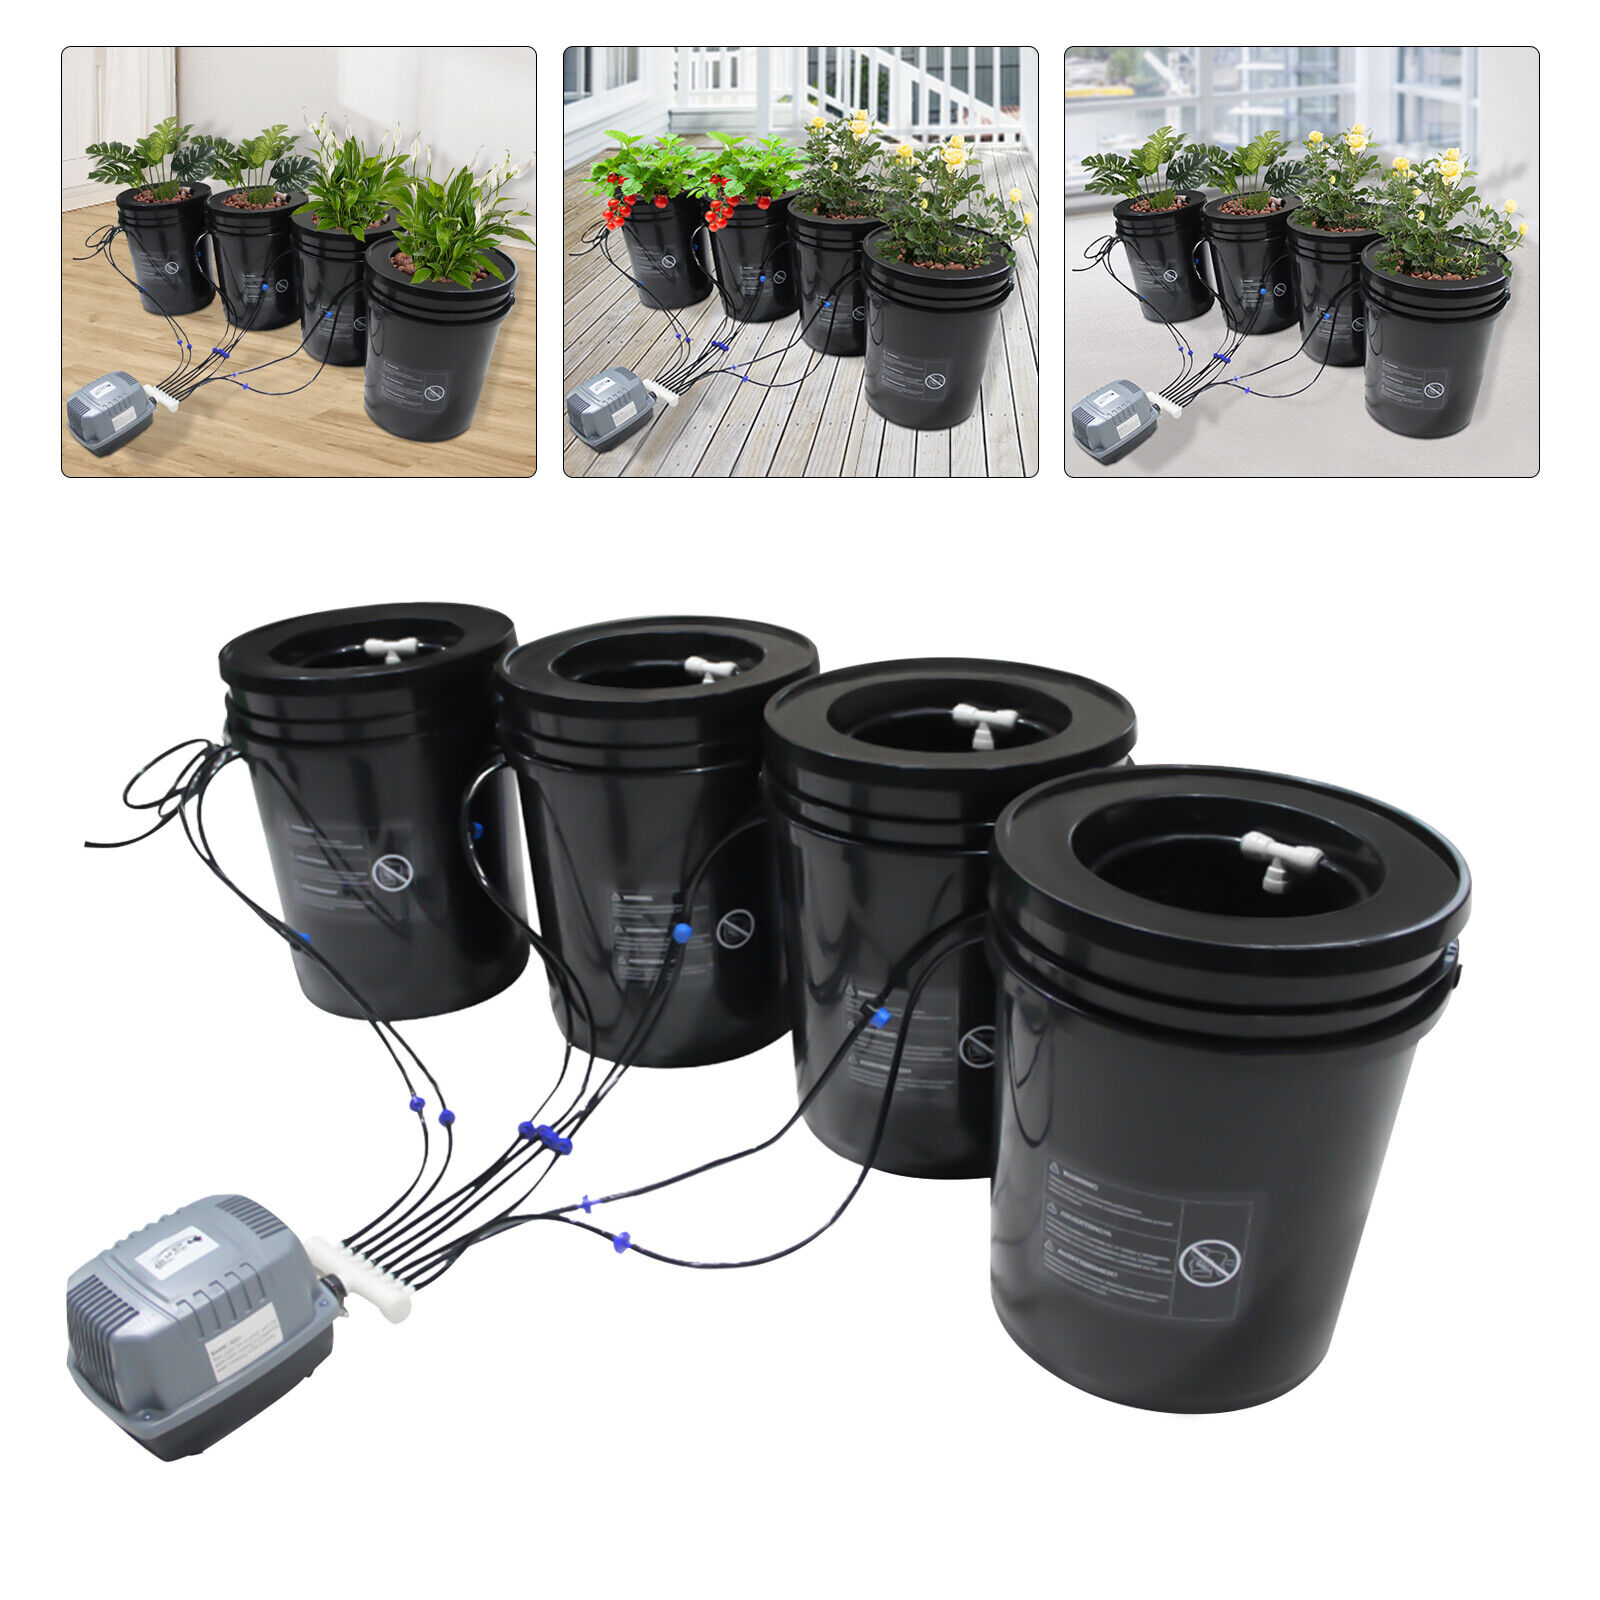 4 Bucket 5 Gal DWC Hydroponics Grow System with Top Drip Irrigation Growing Kit